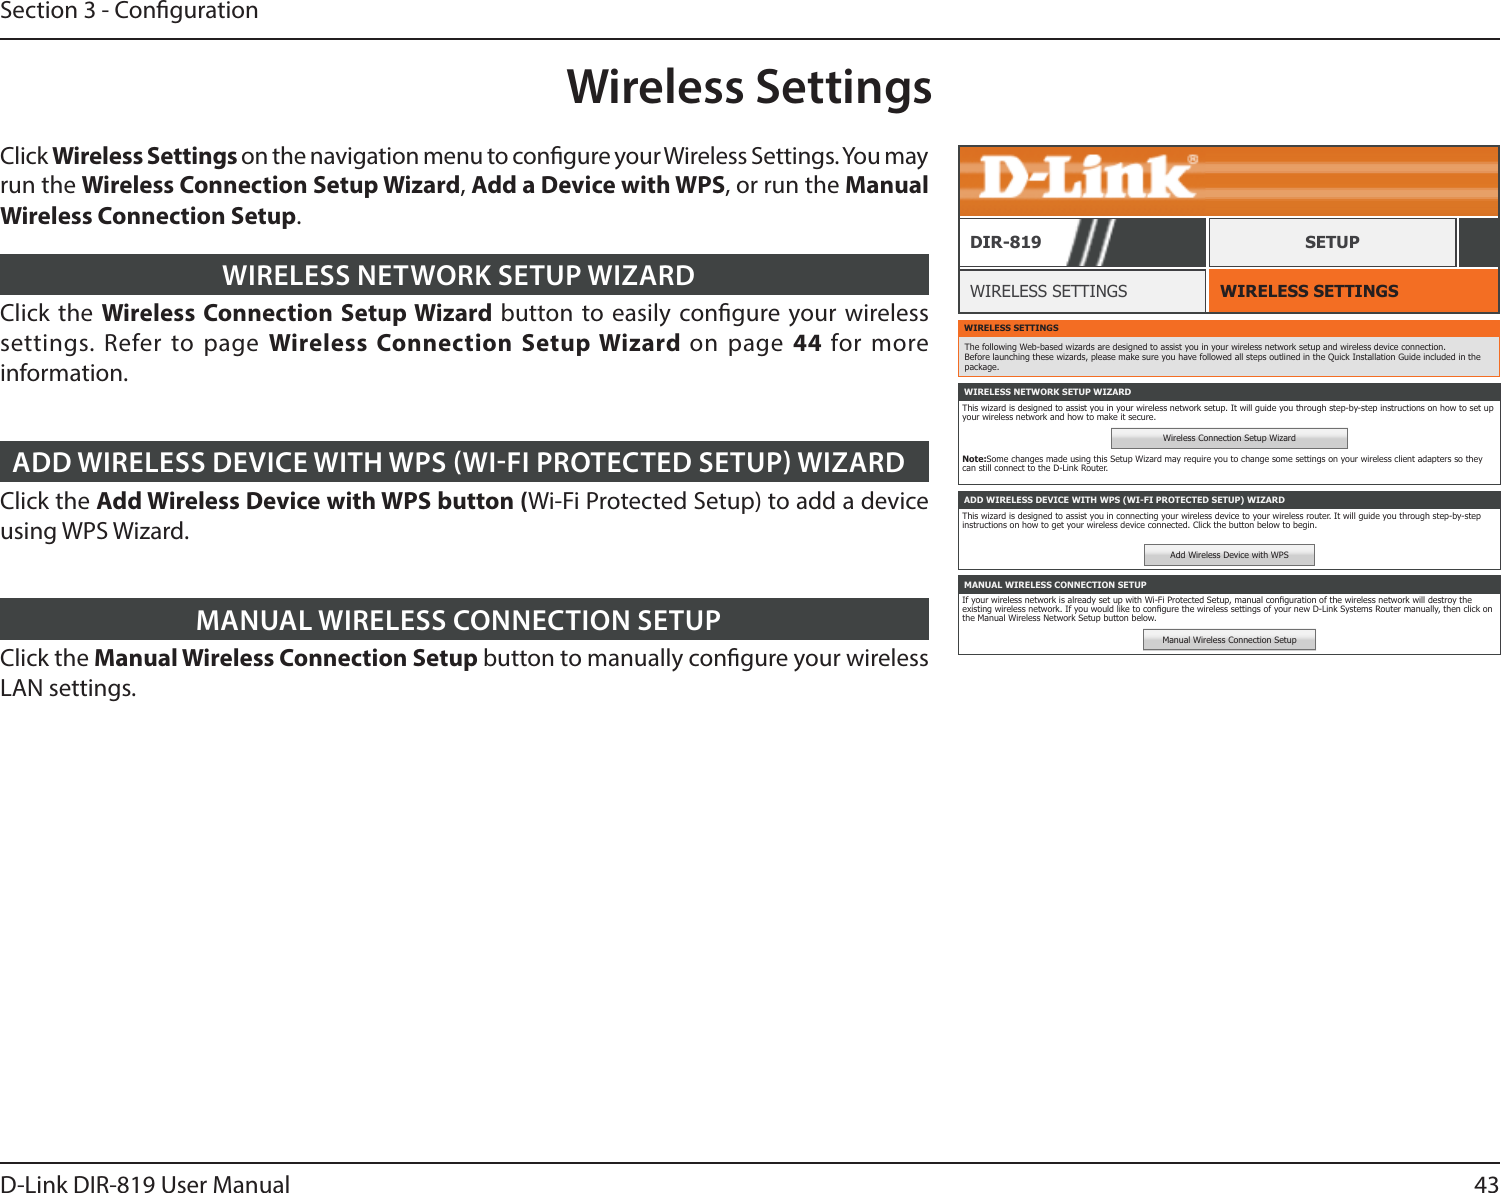 43D-Link DIR-819 User ManualSection 3 - CongurationWireless SettingsWIRELESS SETTINGSWIRELESS SETTINGSDIR-819 SETUPClick the Wireless Connection Setup Wizard button to easily congure your wireless settings. Refer to page Wireless Connection Setup Wizard on page 44  for more information.WIRELESS NETWORK SETUP WIZARDClick the Add Wireless Device with WPS button (Wi-Fi Protected Setup) to add a device using WPS Wizard.ADD WIRELESS DEVICE WITH WPS WIFI PROTECTED SETUP WIZARDClick the Manual Wireless Connection Setup button to manually congure your wireless LAN settings. MANUAL WIRELESS CONNECTION SETUPWIRELESS SETTINGSThe following Web-based wizards are designed to assist you in your wireless network setup and wireless device connection. Before launching these wizards, please make sure you have followed all steps outlined in the Quick Installation Guide included in the package.WIRELESS NETWORK SETUP WIZARDThis wizard is designed to assist you in your wireless network setup. It will guide you through step-by-step instructions on how to set up your wireless network and how to make it secure.Wireless Connection Setup WizardNote:Some changes made using this Setup Wizard may require you to change some settings on your wireless client adapters so they can still connect to the D-Link Router.ADD WIRELESS DEVICE WITH WPS (WI-FI PROTECTED SETUP) WIZARDThis wizard is designed to assist you in connecting your wireless device to your wireless router. It will guide you through step-by-step instructions on how to get your wireless device connected. Click the button below to begin.Add Wireless Device with WPSMANUAL WIRELESS CONNECTION SETUPIf your wireless network is already set up with Wi-Fi Protected Setup, manual conguration of the wireless network will destroy the existing wireless network. If you would like to congure the wireless settings of your new D-Link Systems Router manually, then click on the Manual Wireless Network Setup button below.Manual Wireless Connection SetupClick Wireless Settings on the navigation menu to congure your Wireless Settings. You may run the Wireless Connection Setup Wizard, Add a Device with WPS, or run the Manual Wireless Connection Setup.